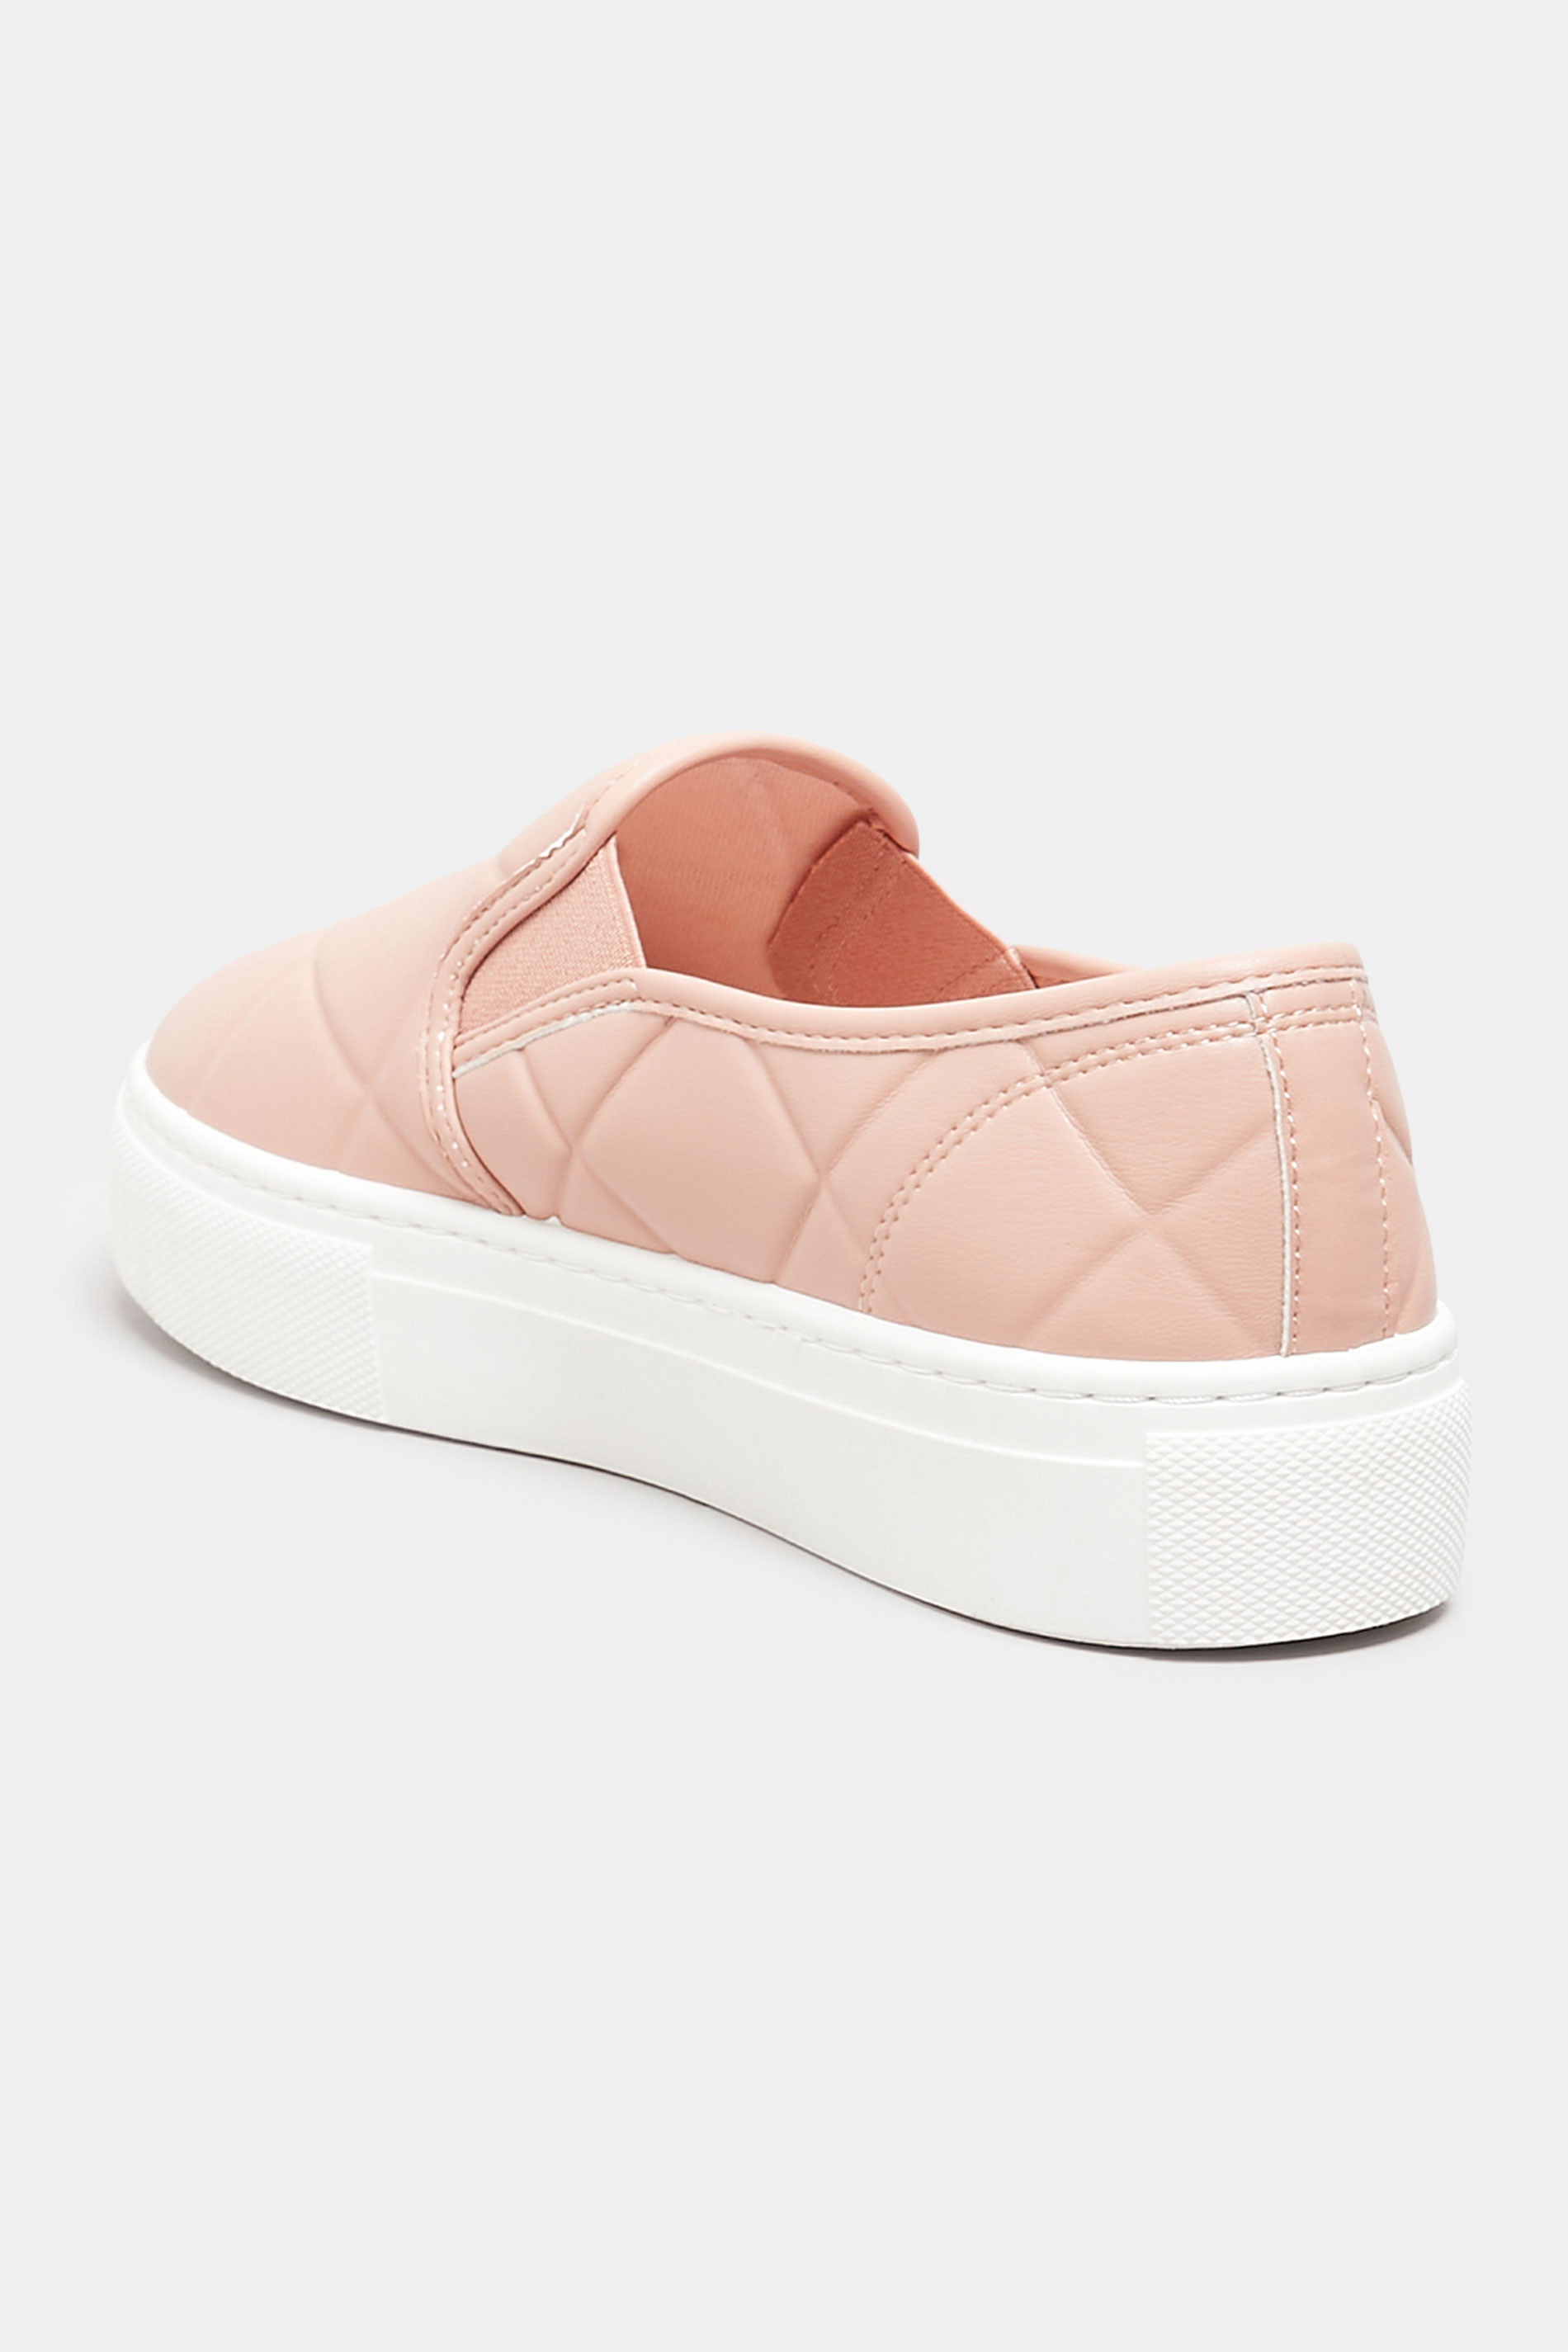 Chaussures Pieds Larges Tennis & Baskets Pieds Larges | Tennis Roses Molletonnées Plateformes Pieds Extra Larges EEE - WH28907